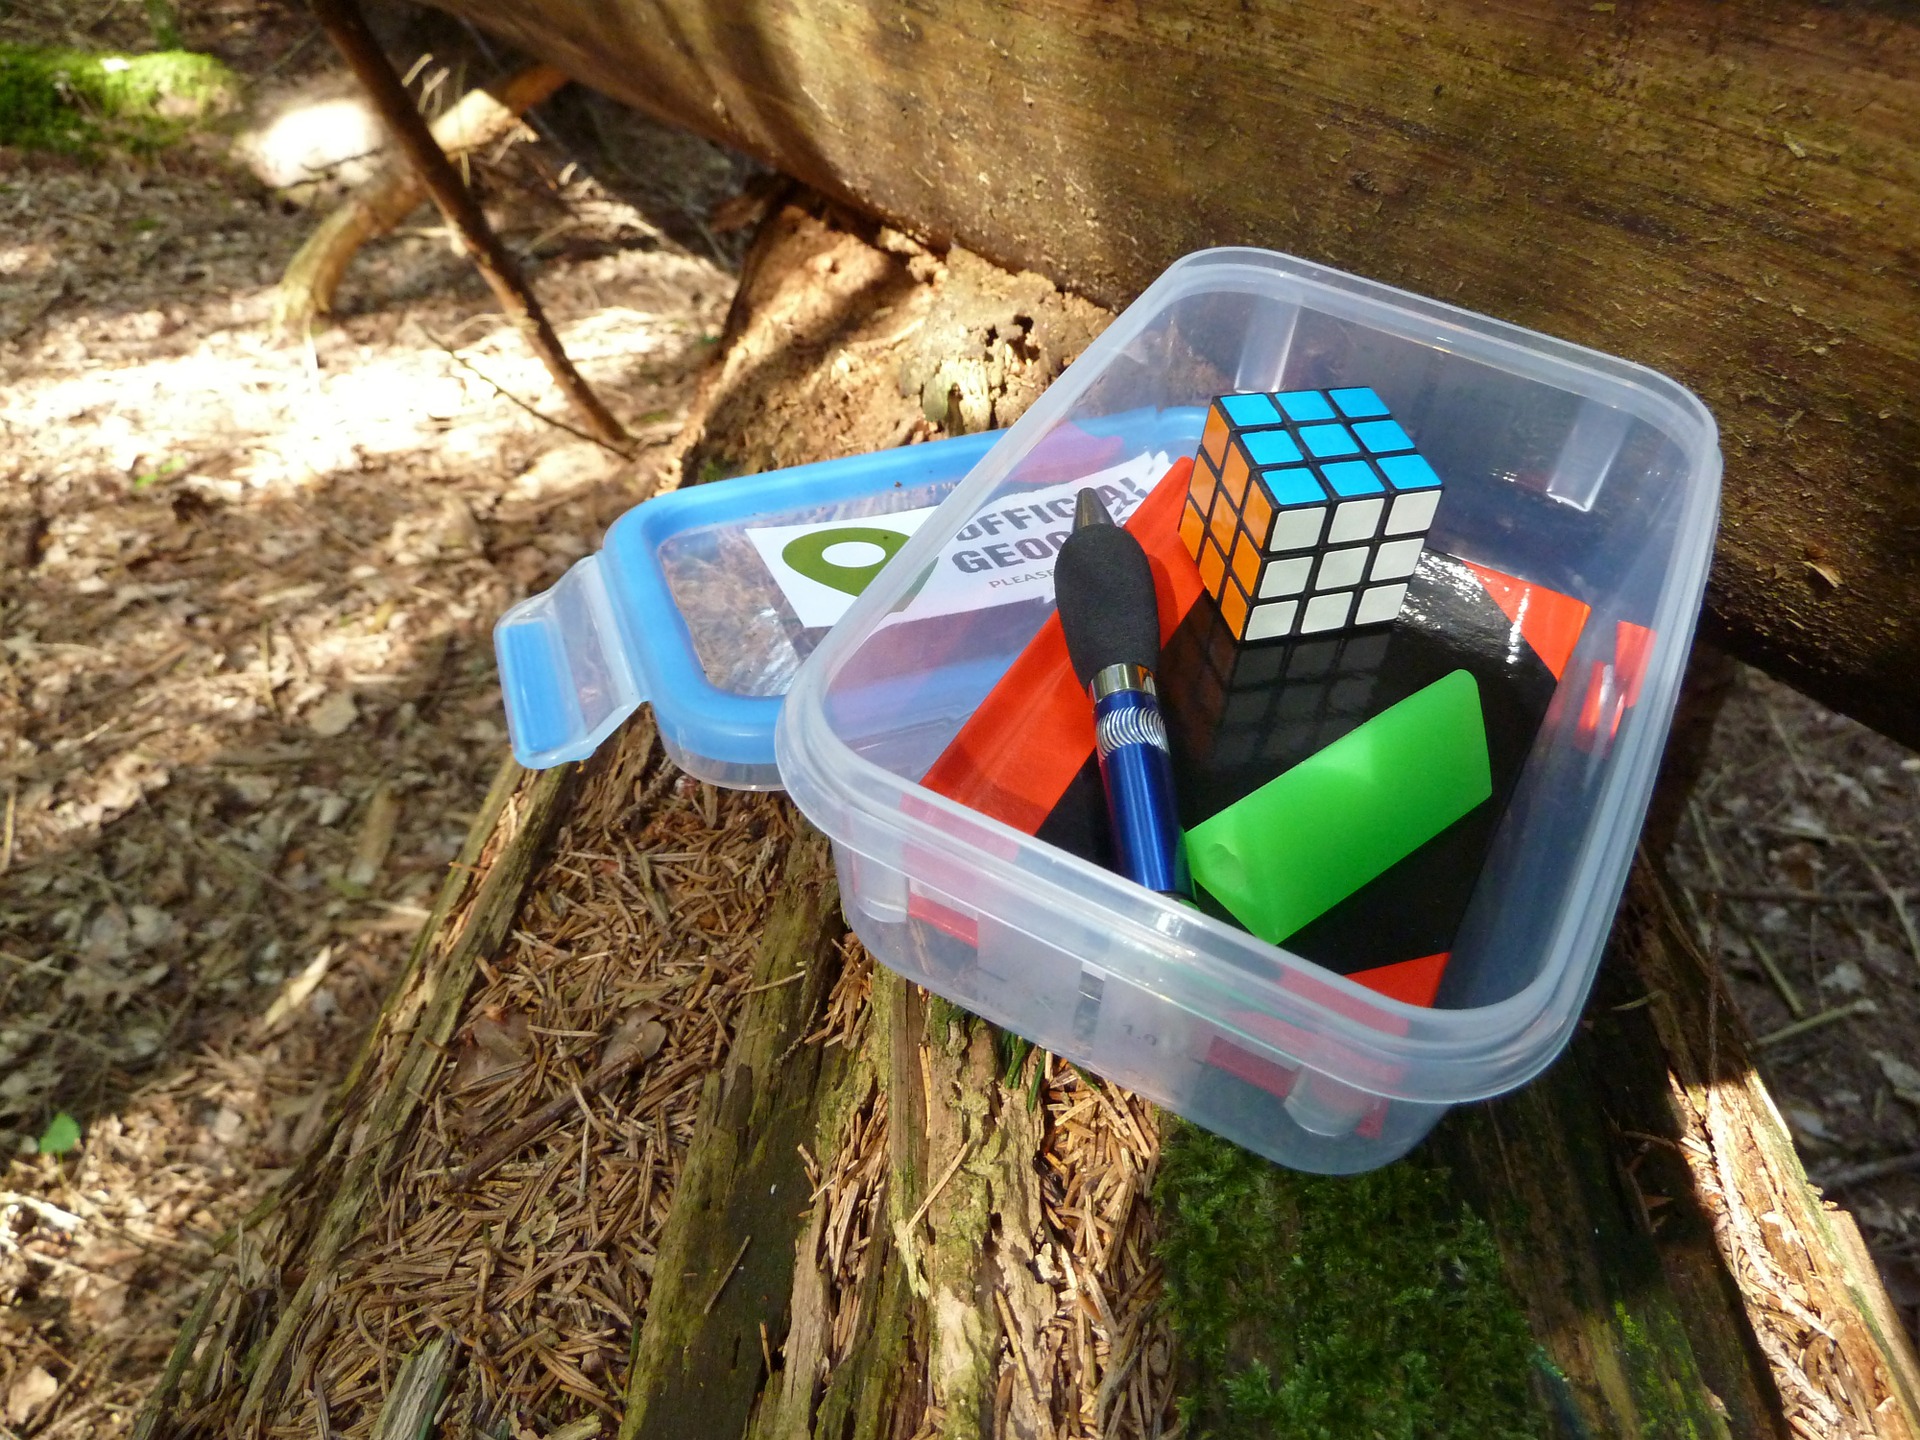 Geocachers are prone to leaving trinkets behind for others to find. (Image via prainc.com)